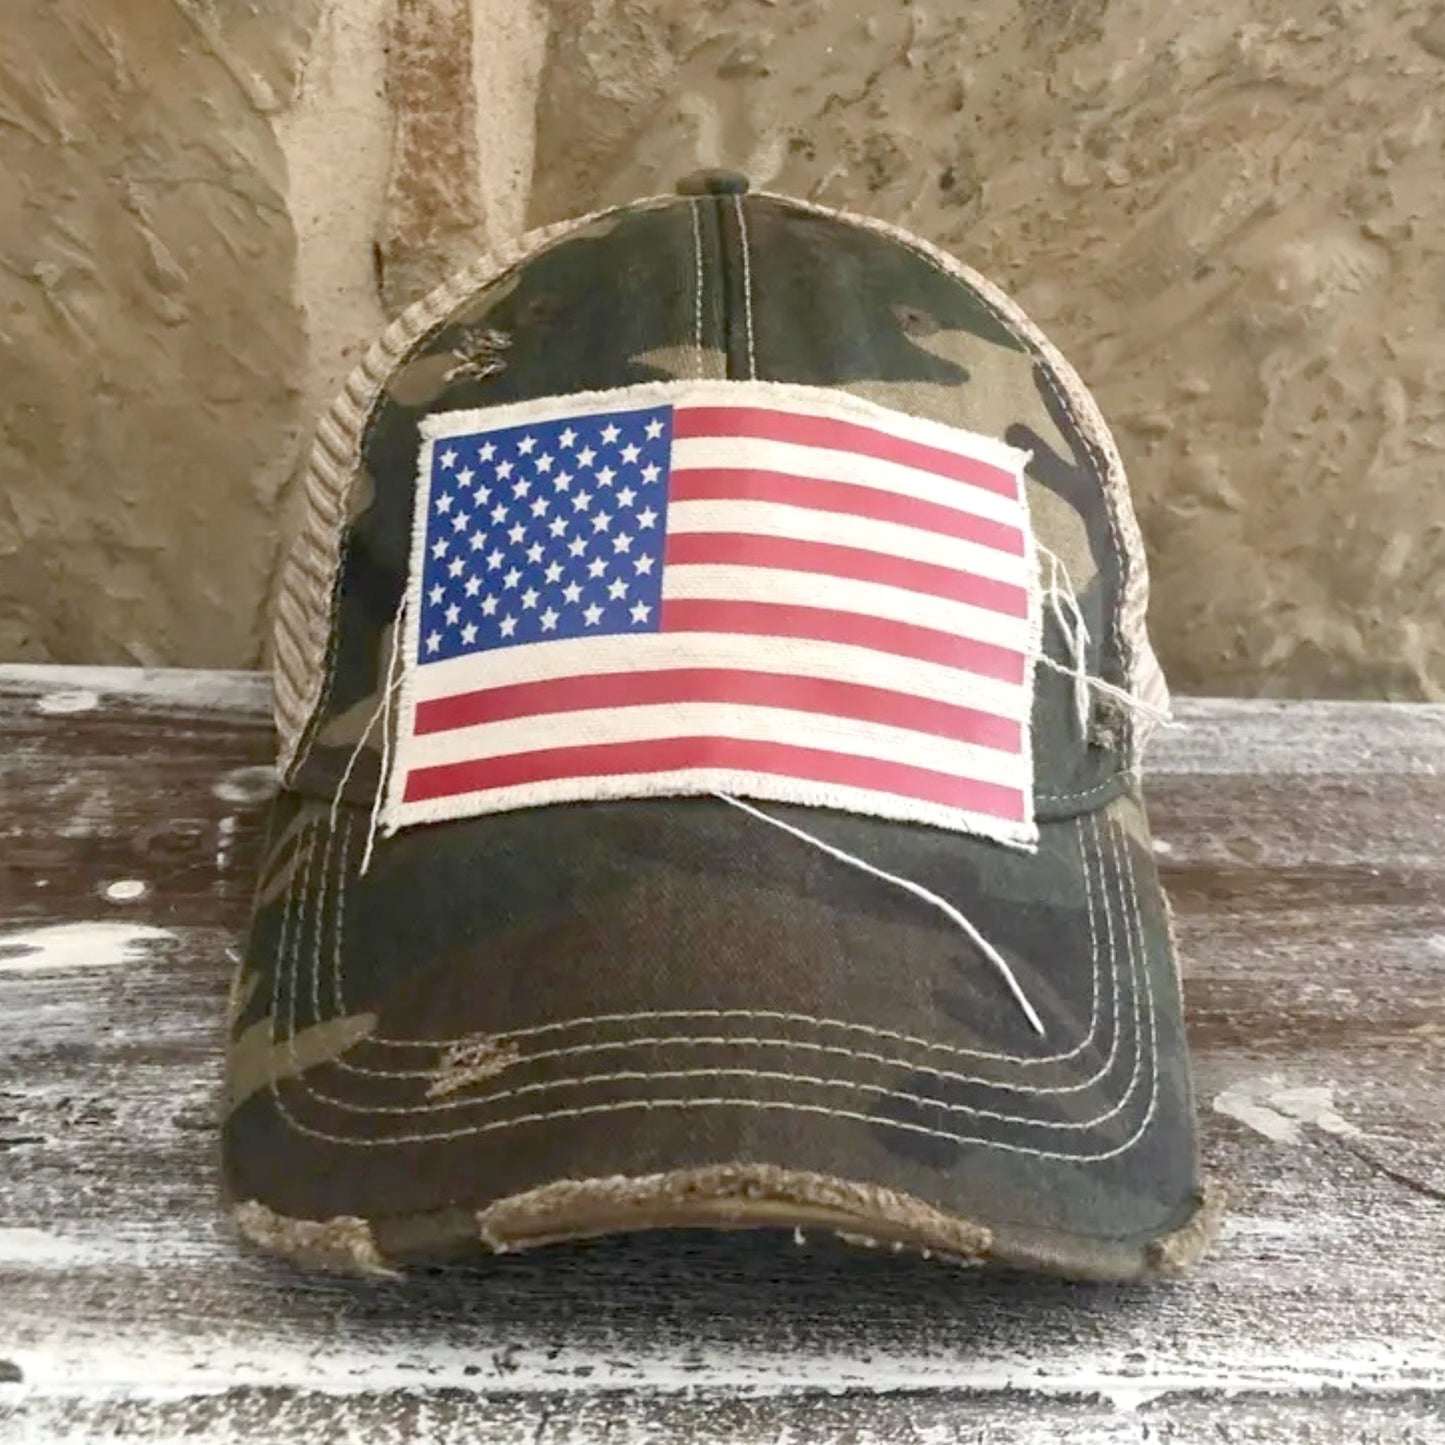 Distressed American Flag Hat - Camo - Made in the USA